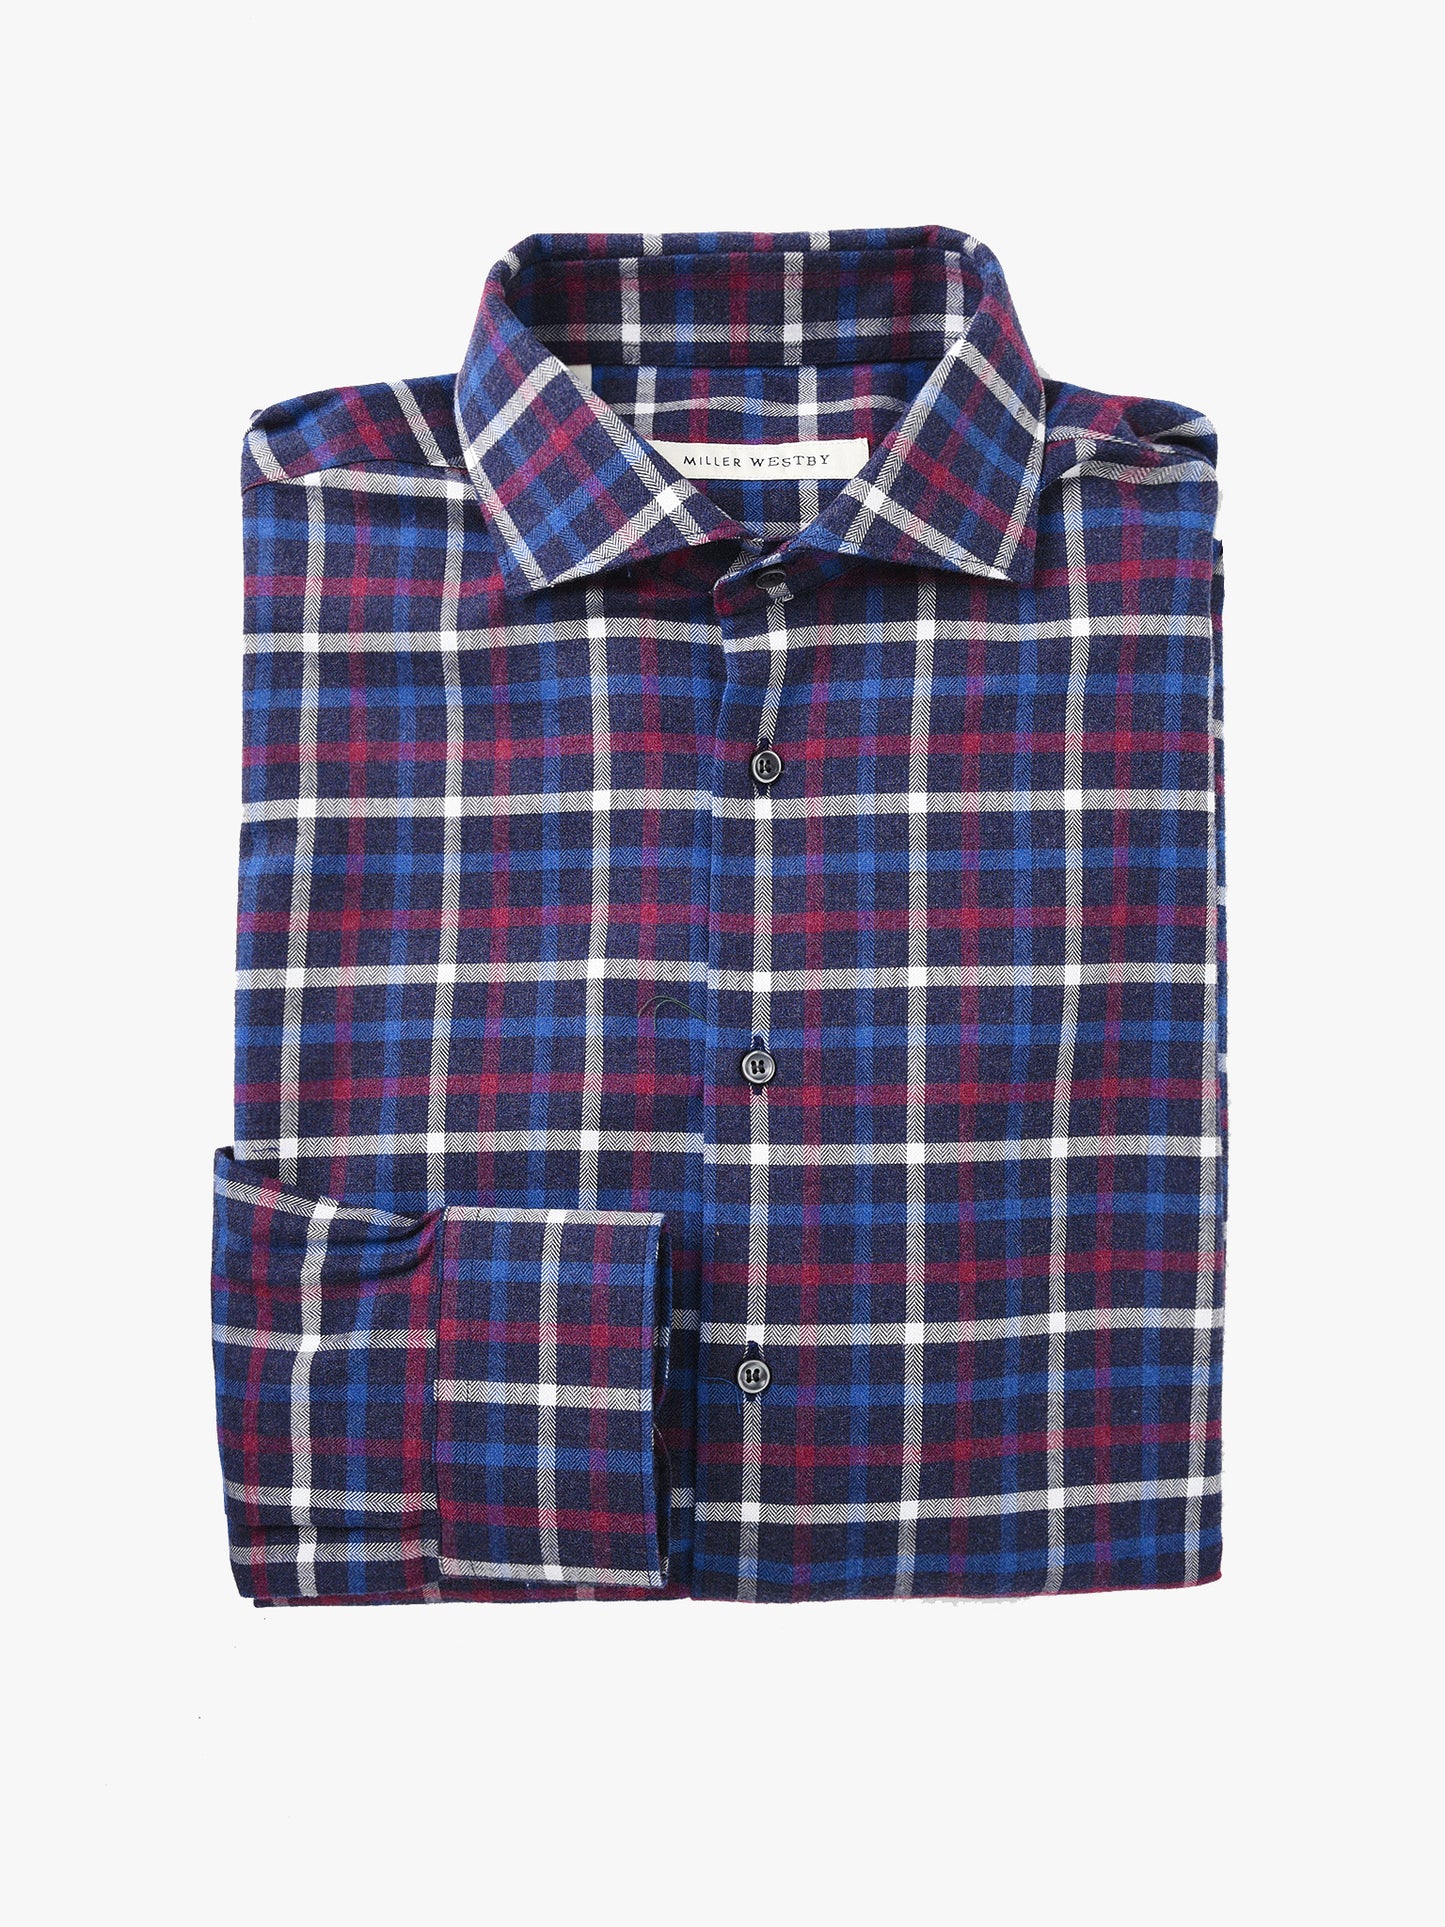 Miller Westby Harrison Button-Down Shirt